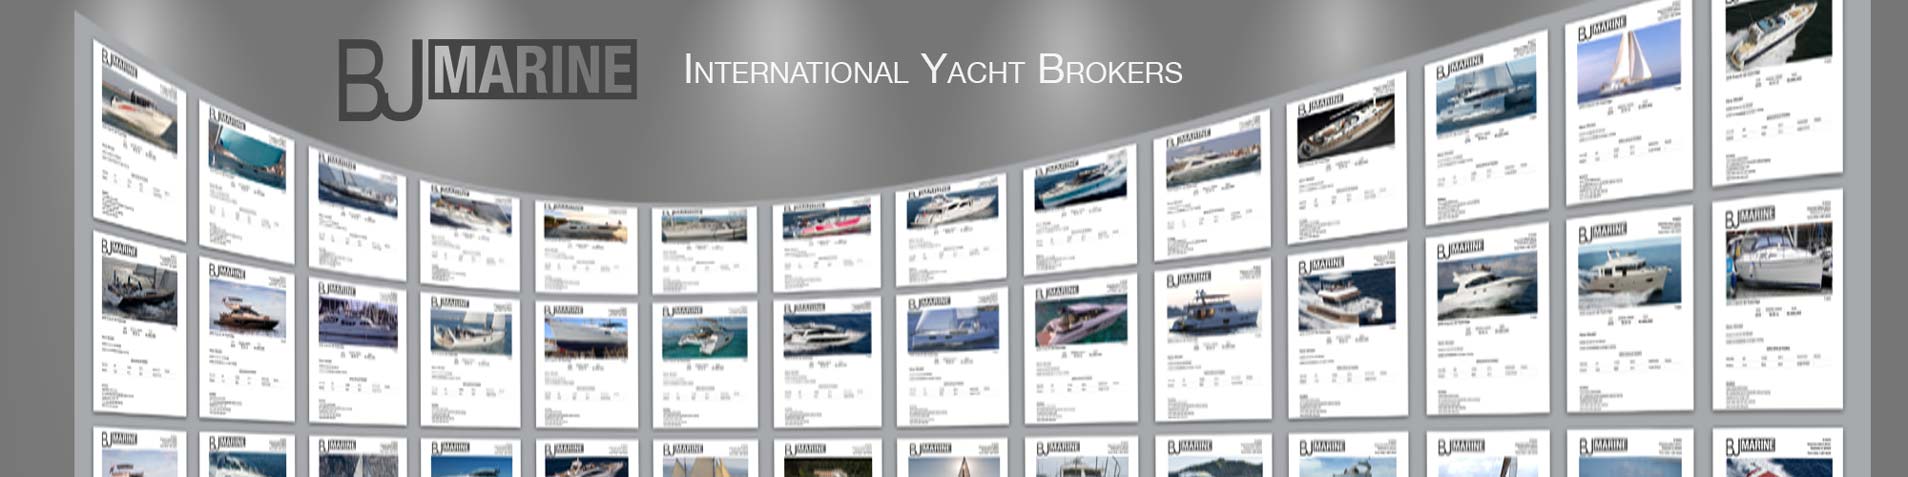 Sell your boat with expert international yacht broker BJ Marine We sell sail boats, yachts, power boats, cruisers and more